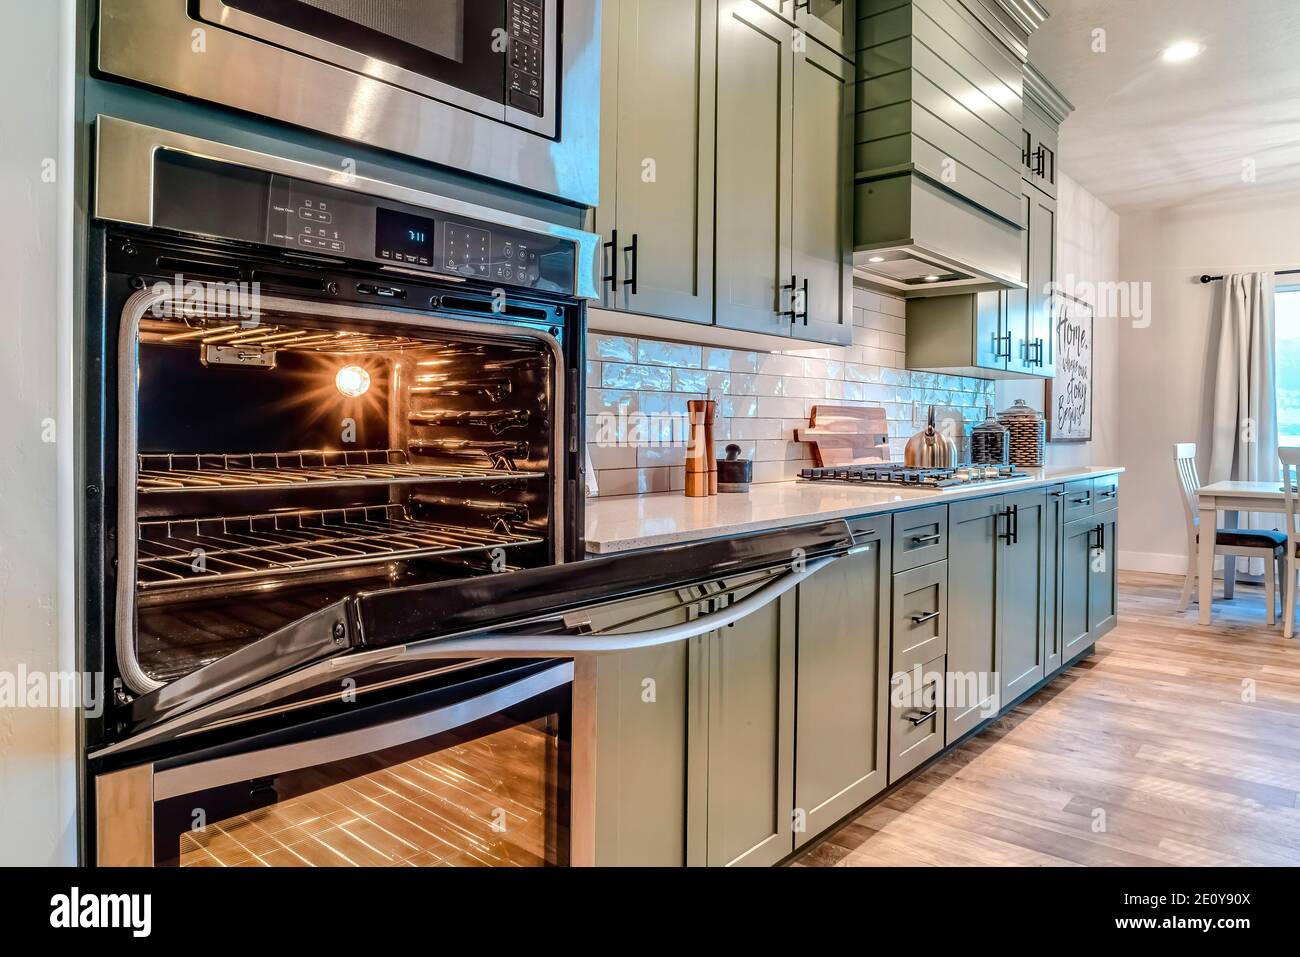 Electric oven and microwave inside a modern home kitchen with ...